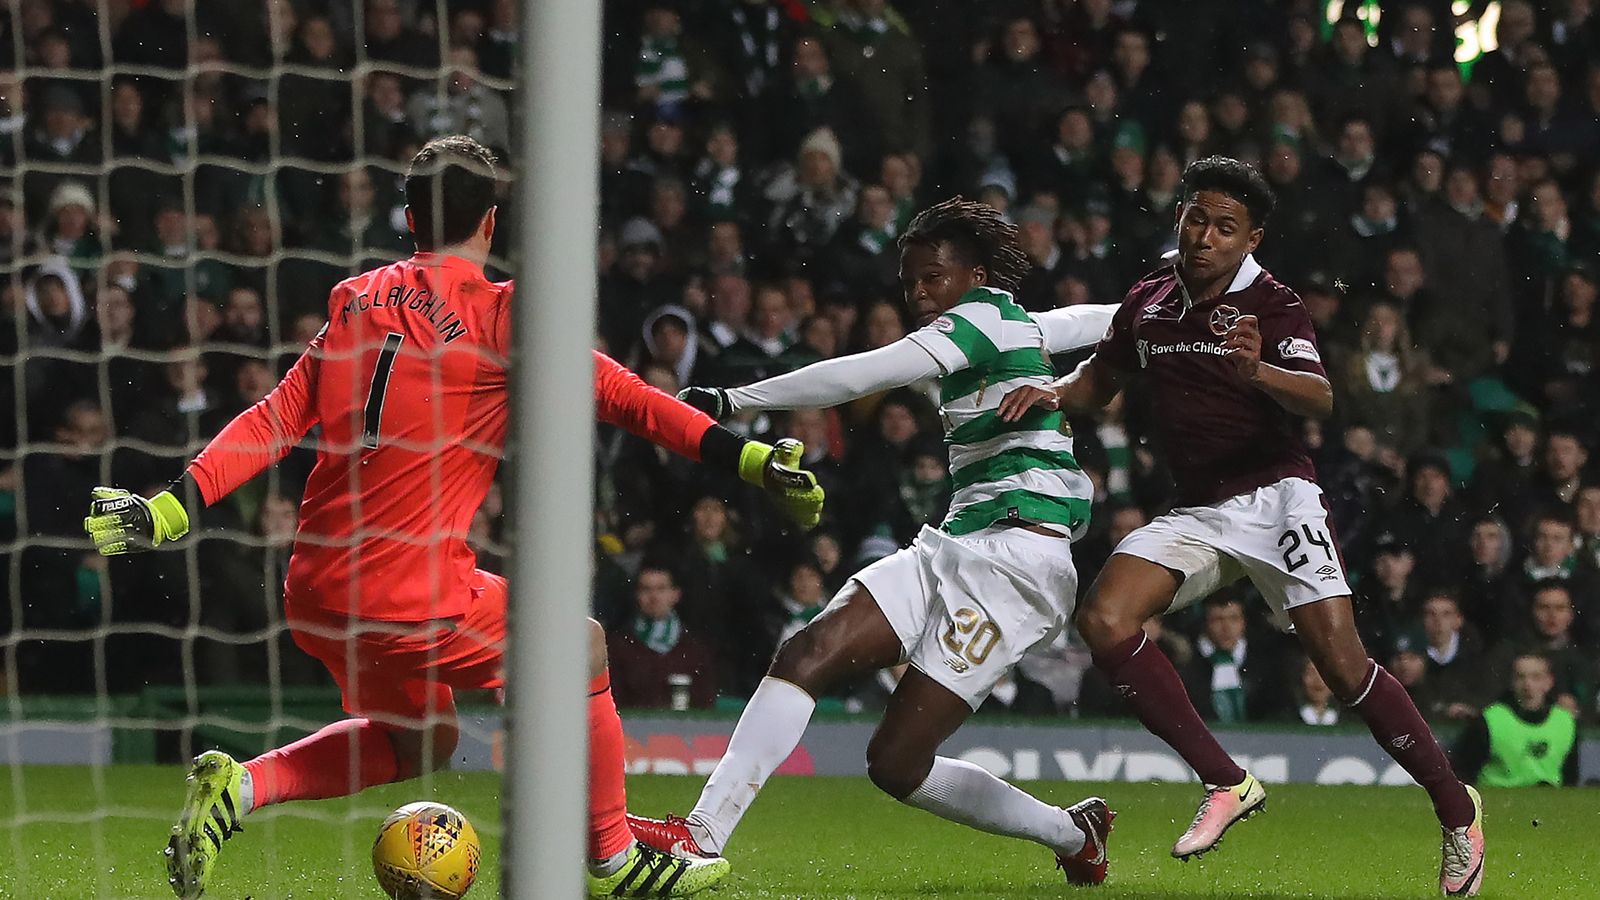 Celtic 3 - 1 Hearts - Match Report & Highlights1600 x 900